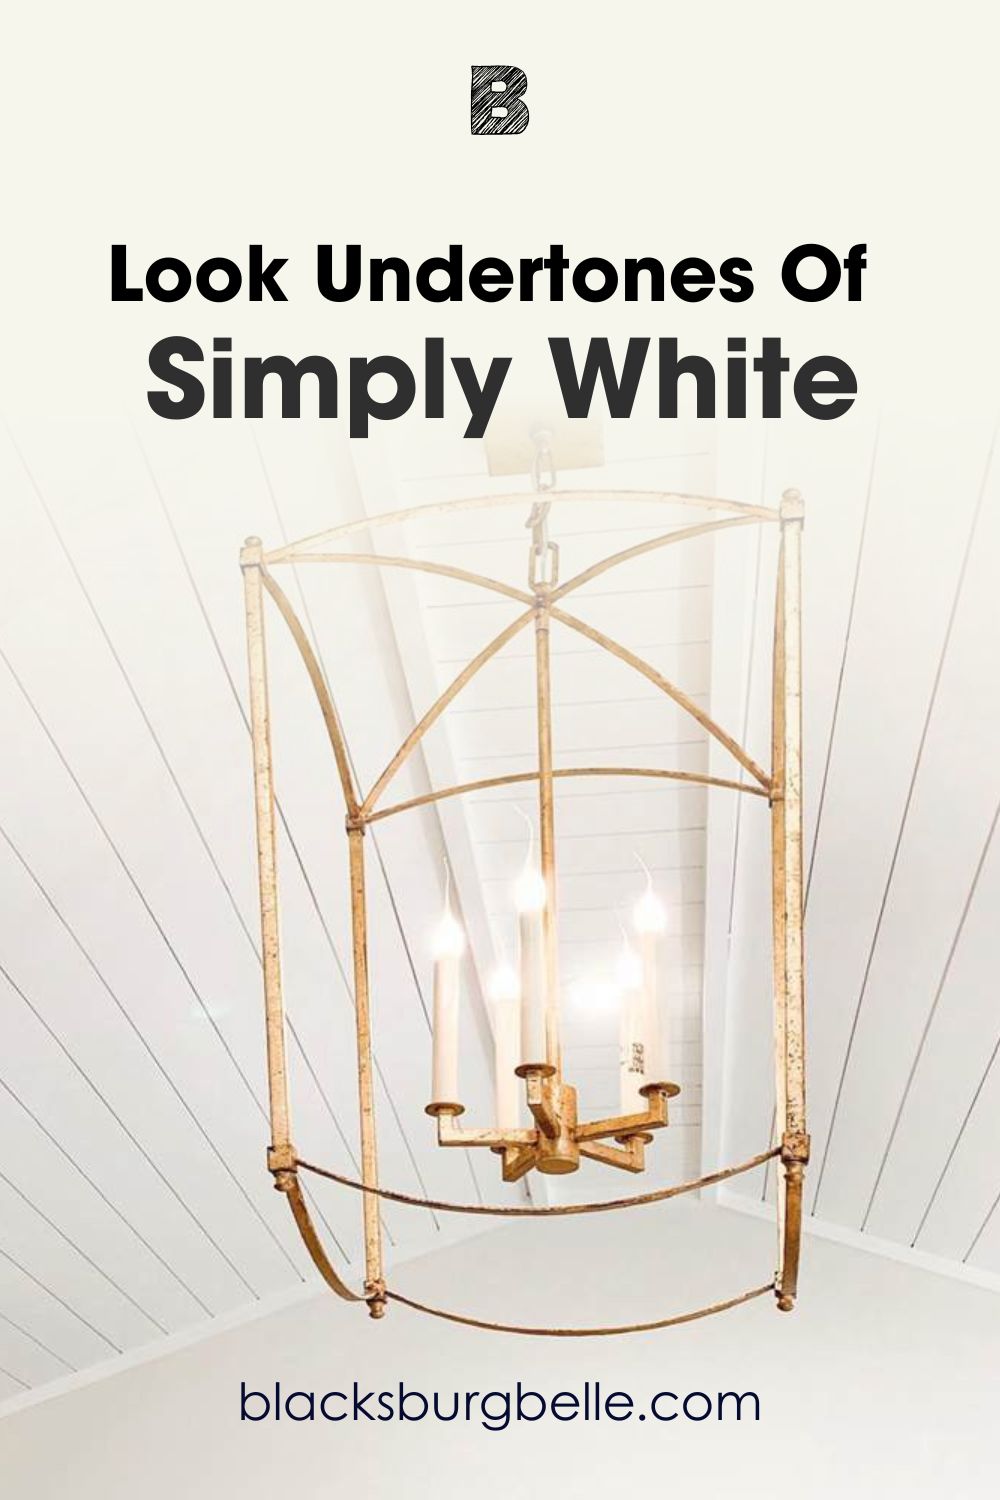 A Closer Look at the Undertones of Simply White